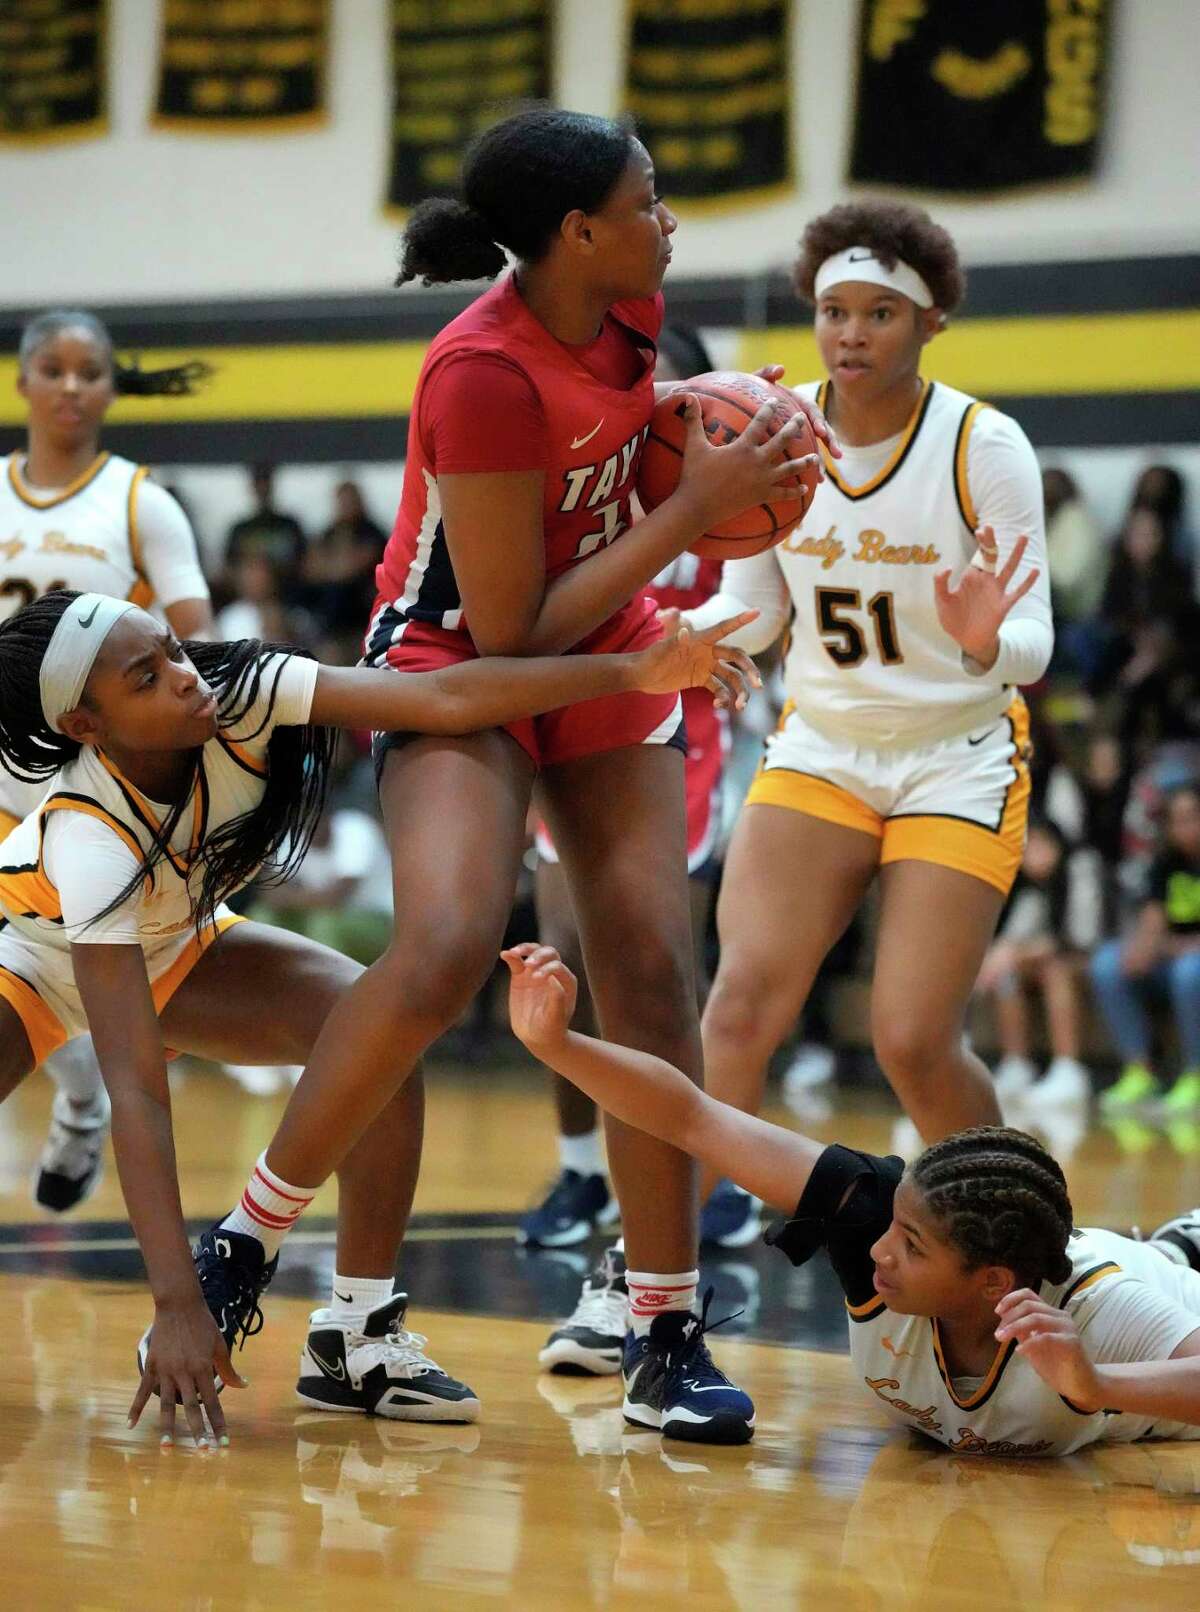 Alief Taylor's Nataliyah Gray (22) tries to hang onto the ball against Hasting High School's Domitila Amugu (11) and her teammate Melinda Winston (23) during the second half of a District 23-6A girls basketball game at Hastings High School on Saturday, Jan. 7, 2023 in Houston. Hasting High School won the game 52-45 against Alief Taylor.